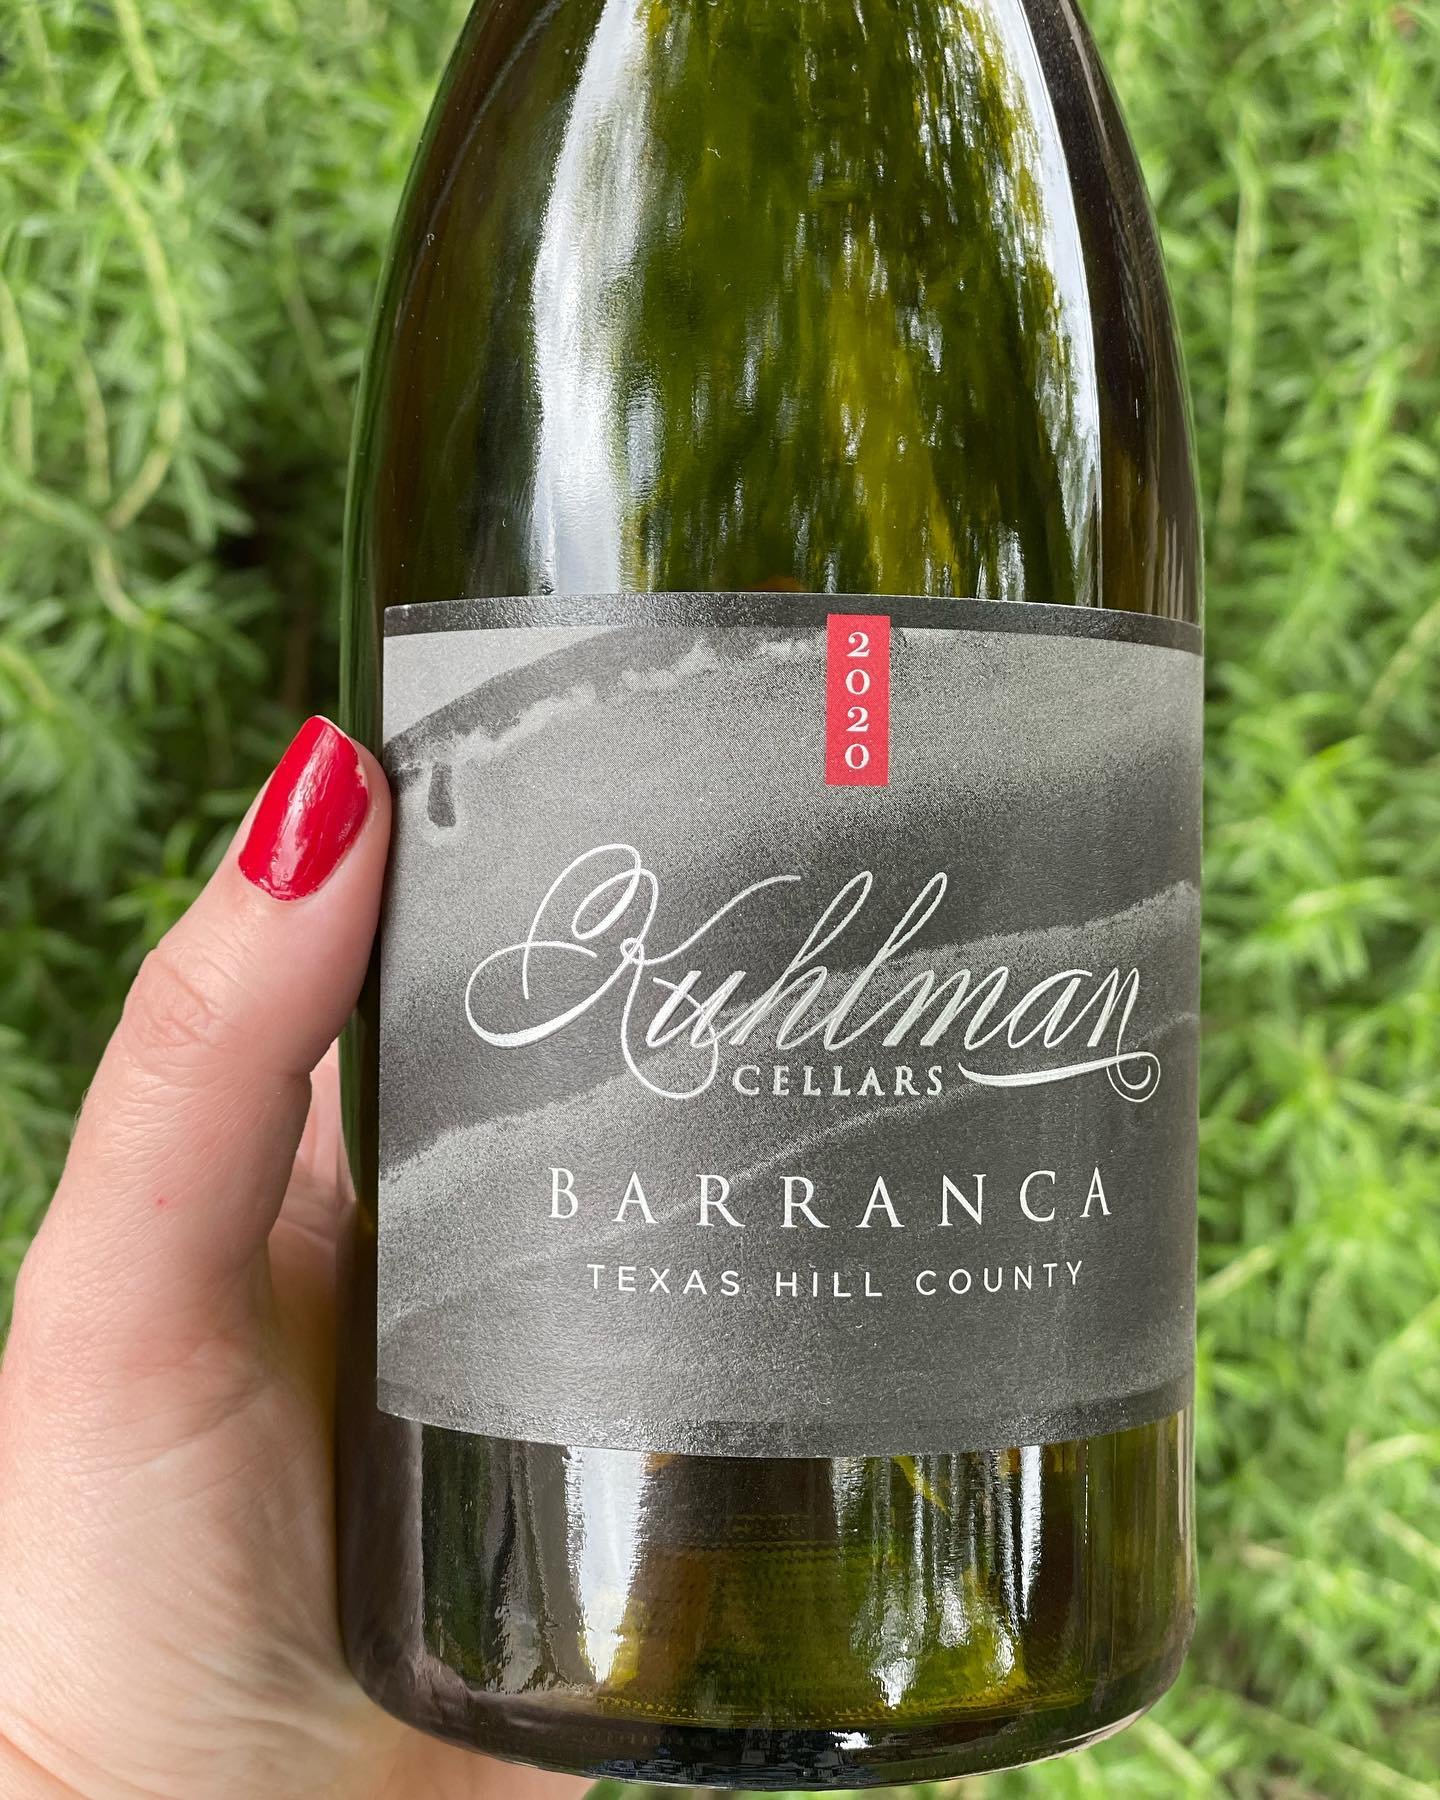 Don&rsquo;t you hate it when it&rsquo;s 5 o&rsquo;clock and you&rsquo;re out of Barranca? 😩 Order online at kuhlmancellars.com and have this spectacular wine delivered right to your door! 🍷